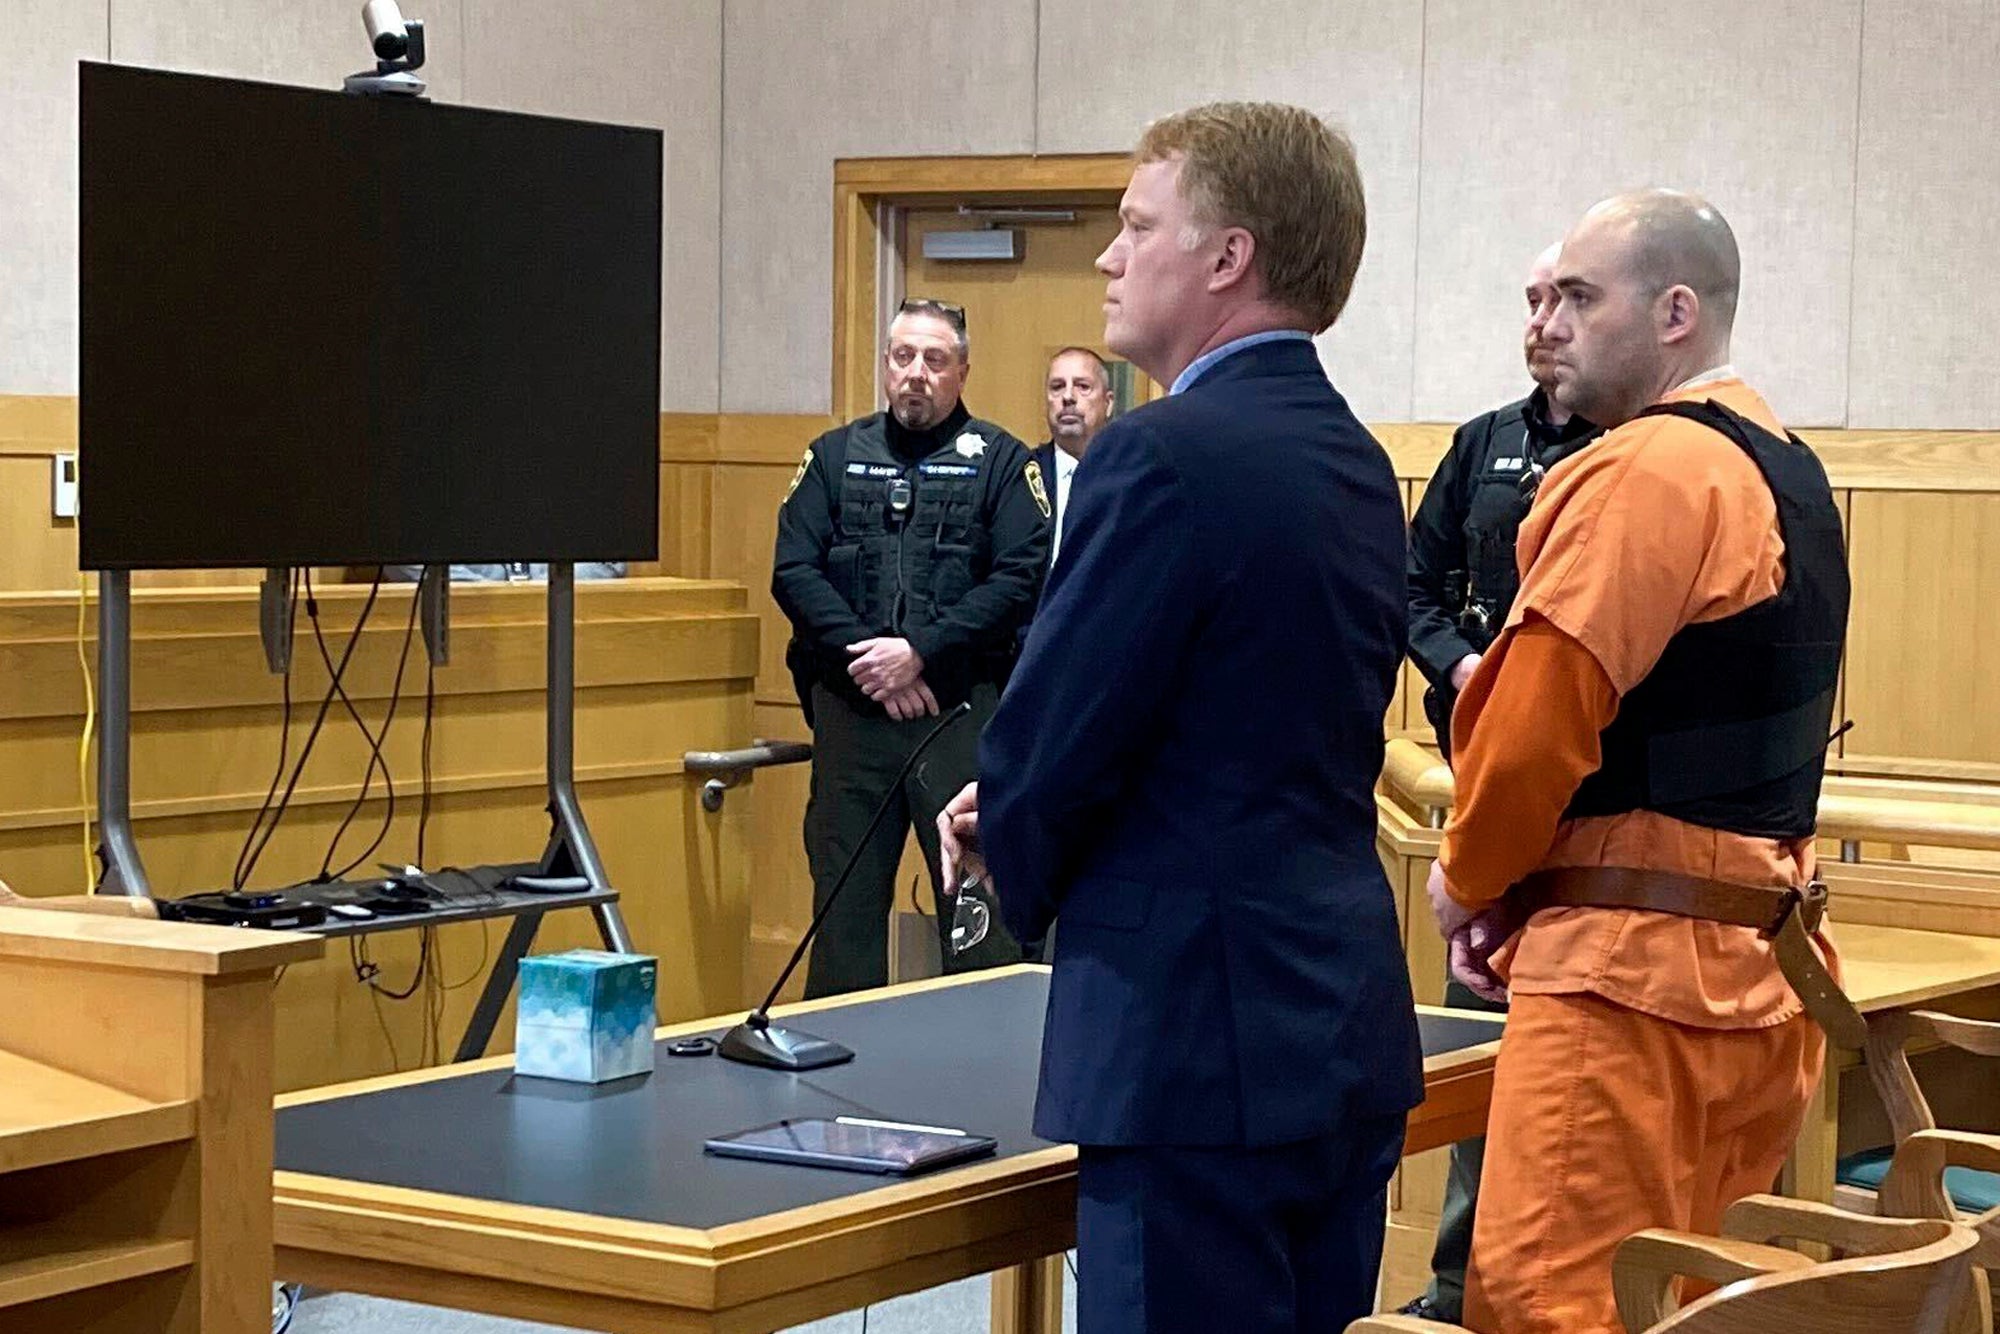 Joseph Eaton, the suspect in a shooting spree in Maine, appears in court in West Bath, Maine, Thursday, April 20, 2023